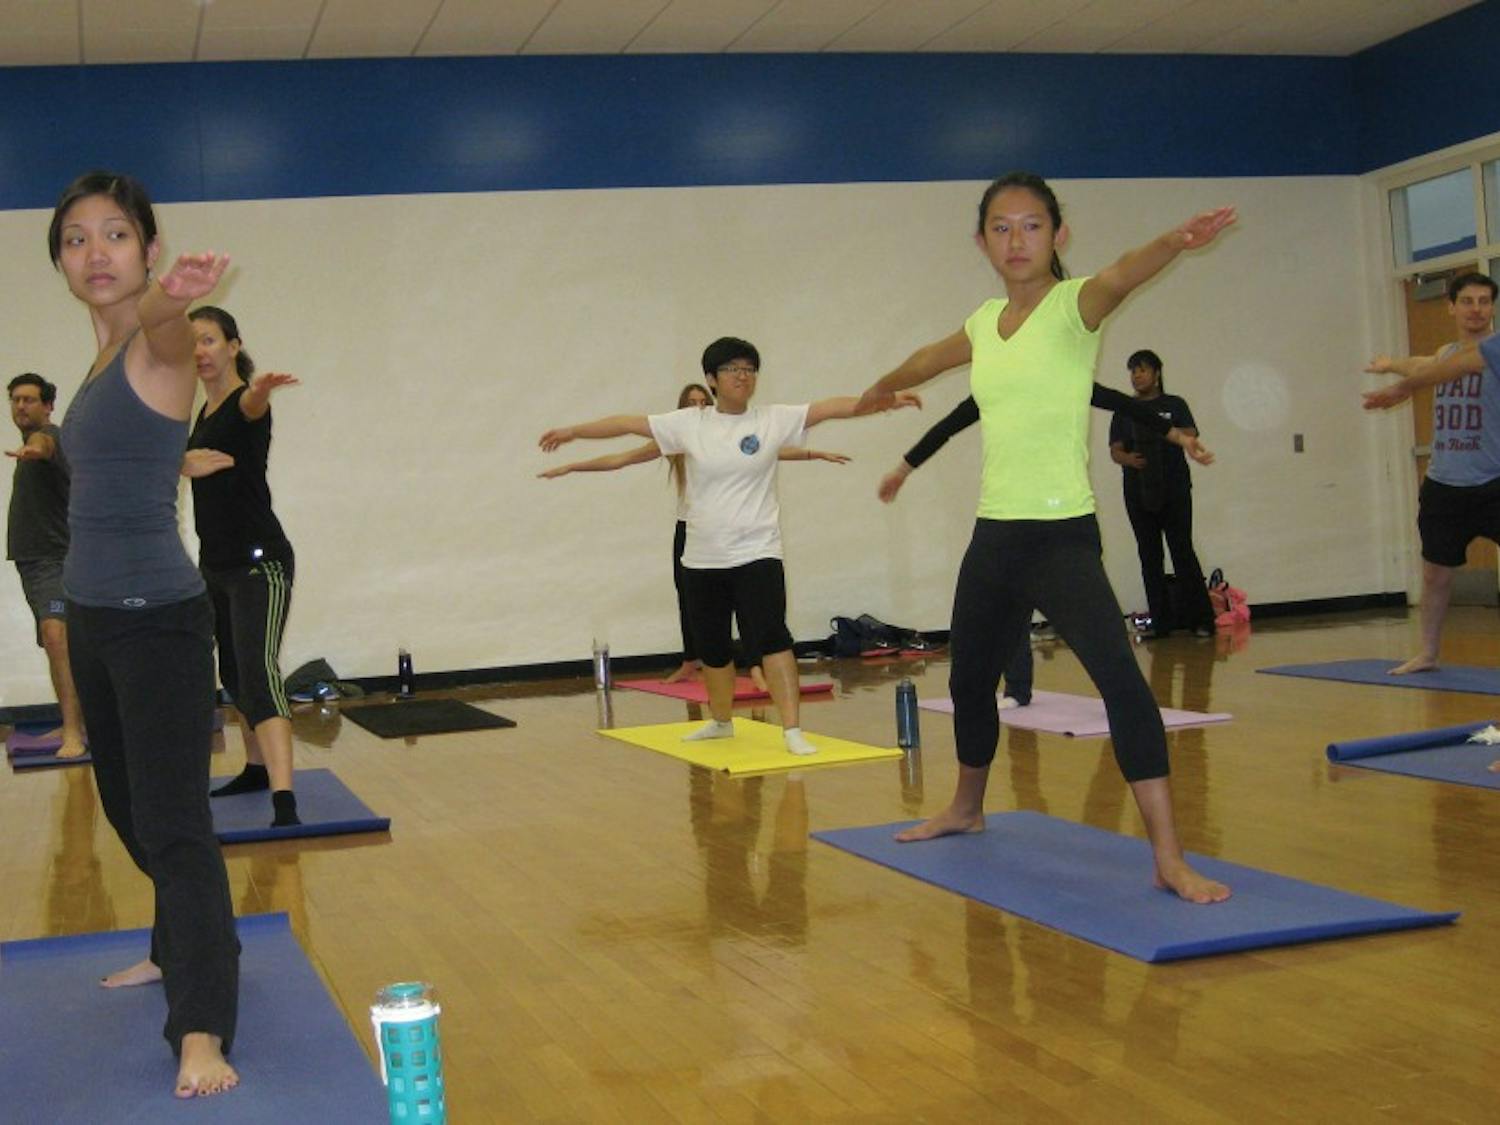 Yoga is a popular pastime for students trying to relax—many dedicated to the practice also teach classes at Wilson and Brodie Recreations Centers.